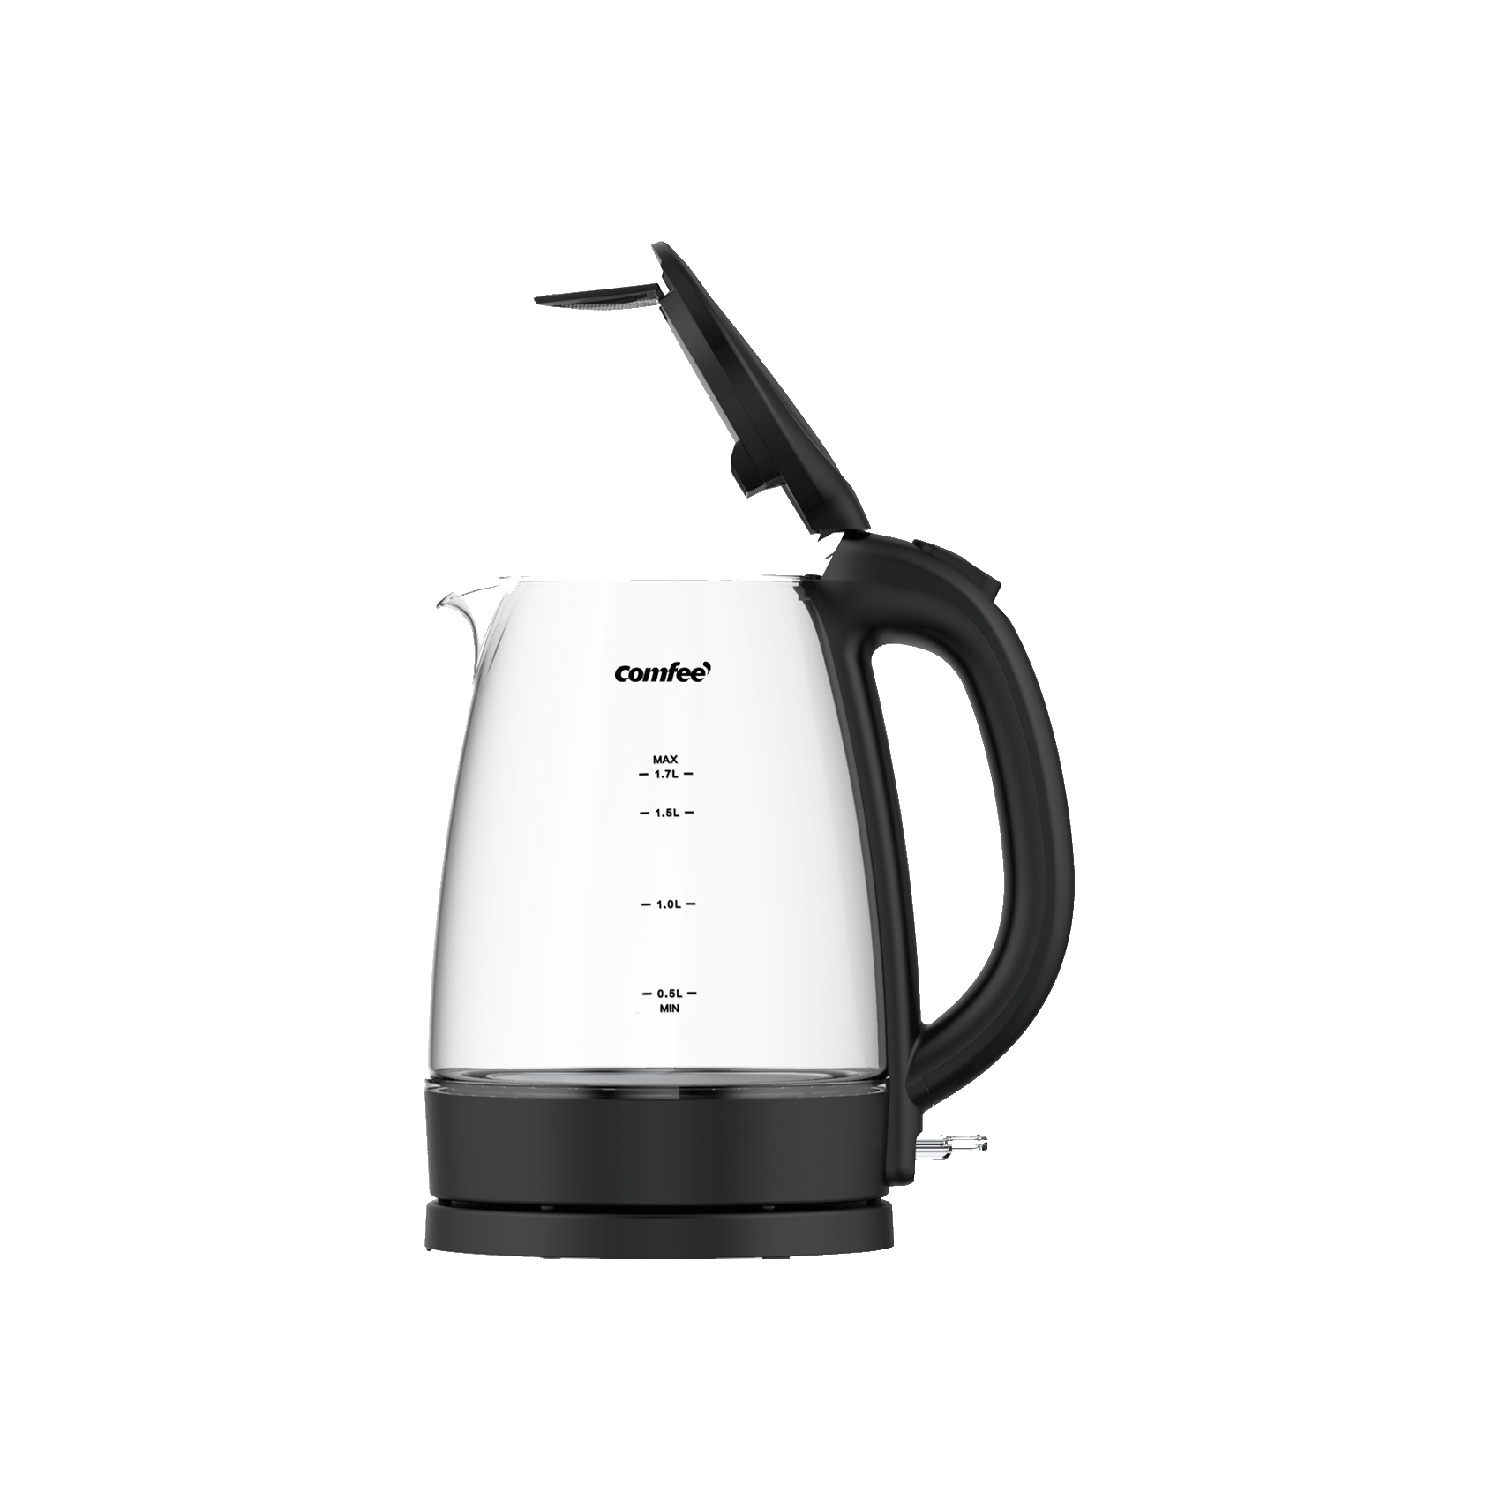 Electric Glass Kettle with Color Changing LED Indicators and